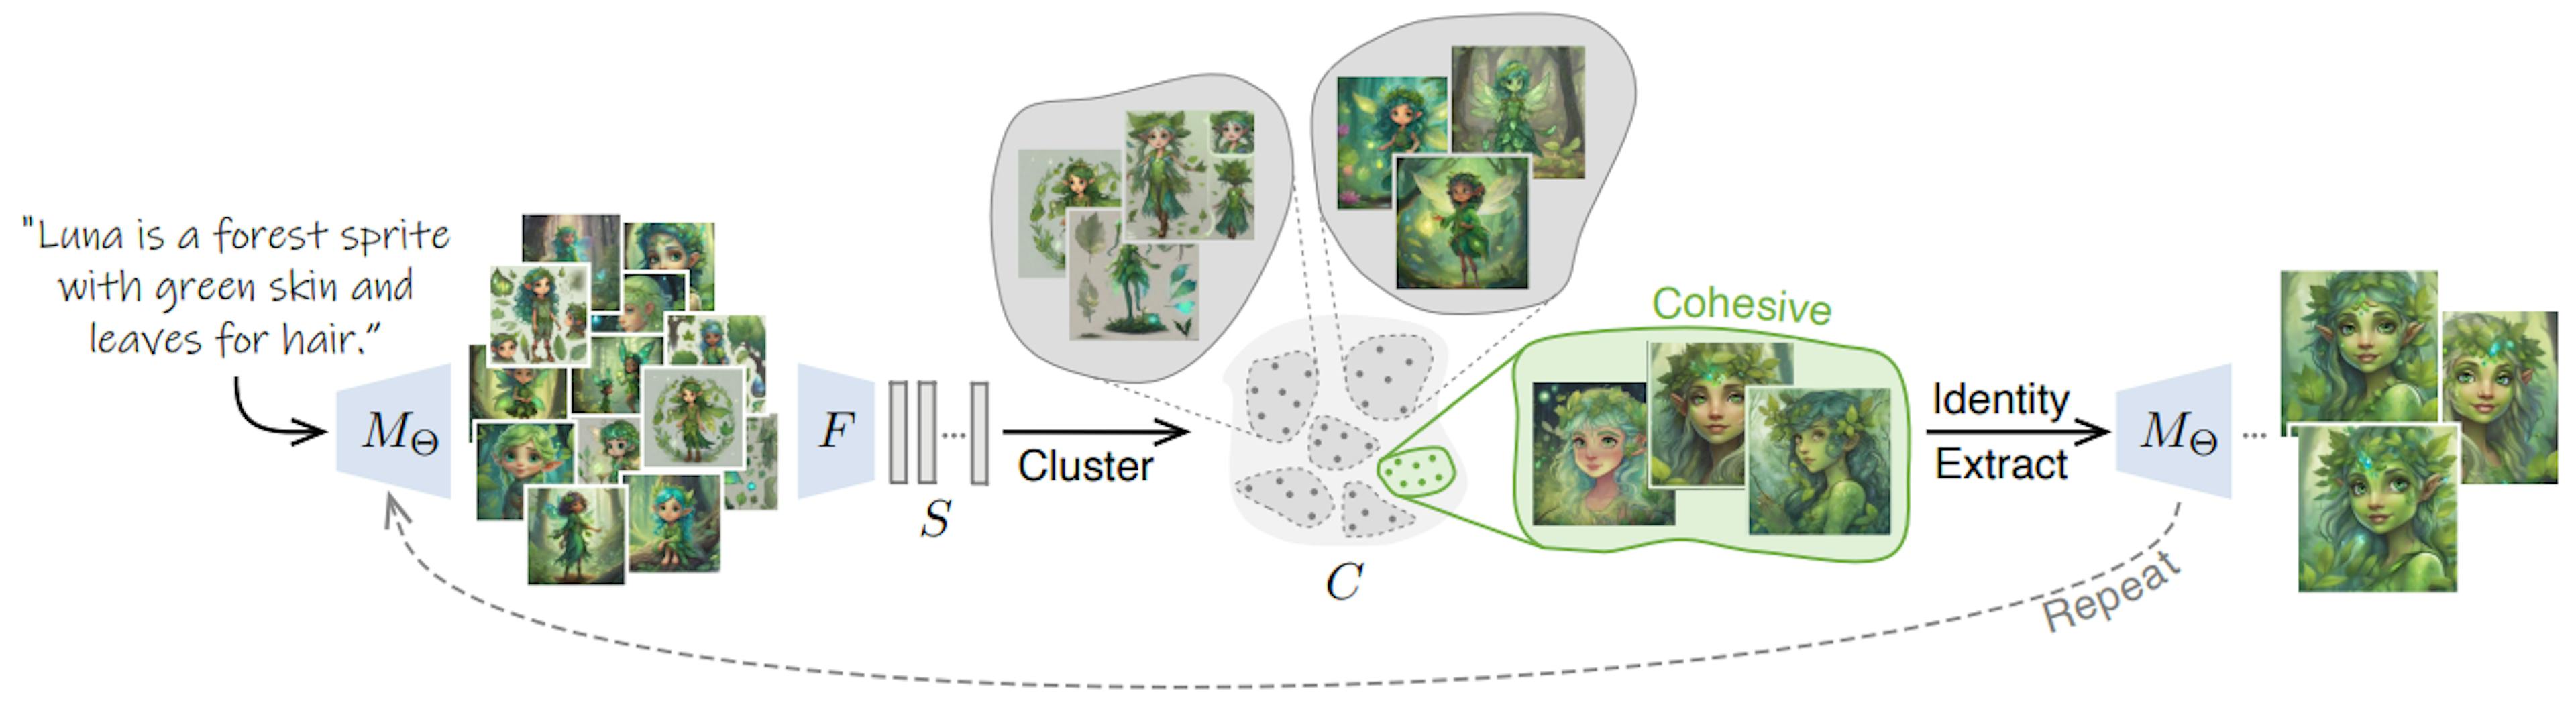 Figure 3. Method overview. Given an input text prompt, we start by generating numerous images using the text-to-image model MΘ, which are embedded into a semantic feature space using the feature extractor F. Next, these embeddings are clustered and the most cohesive group is chosen, since it contains images with shared characteristics. The “common ground” among the images in this set is used to refine the representation Θ to better capture and fit the target. These steps are iterated until convergence to a consistent identity.